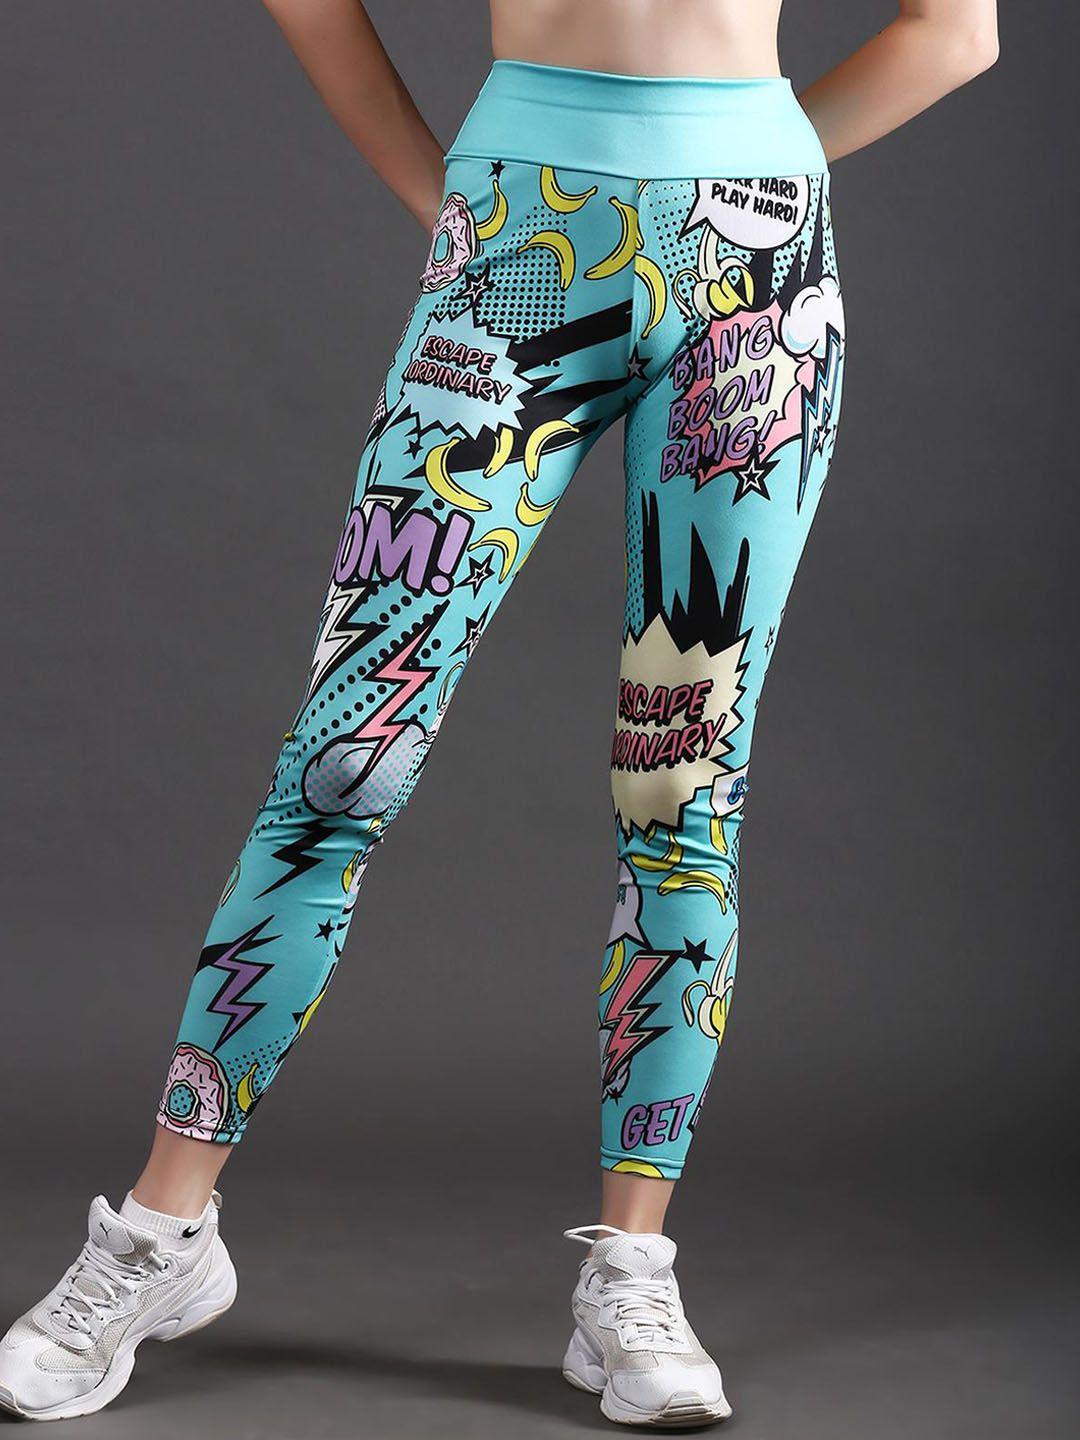 the dance bible women colorful printed high waist gym tights